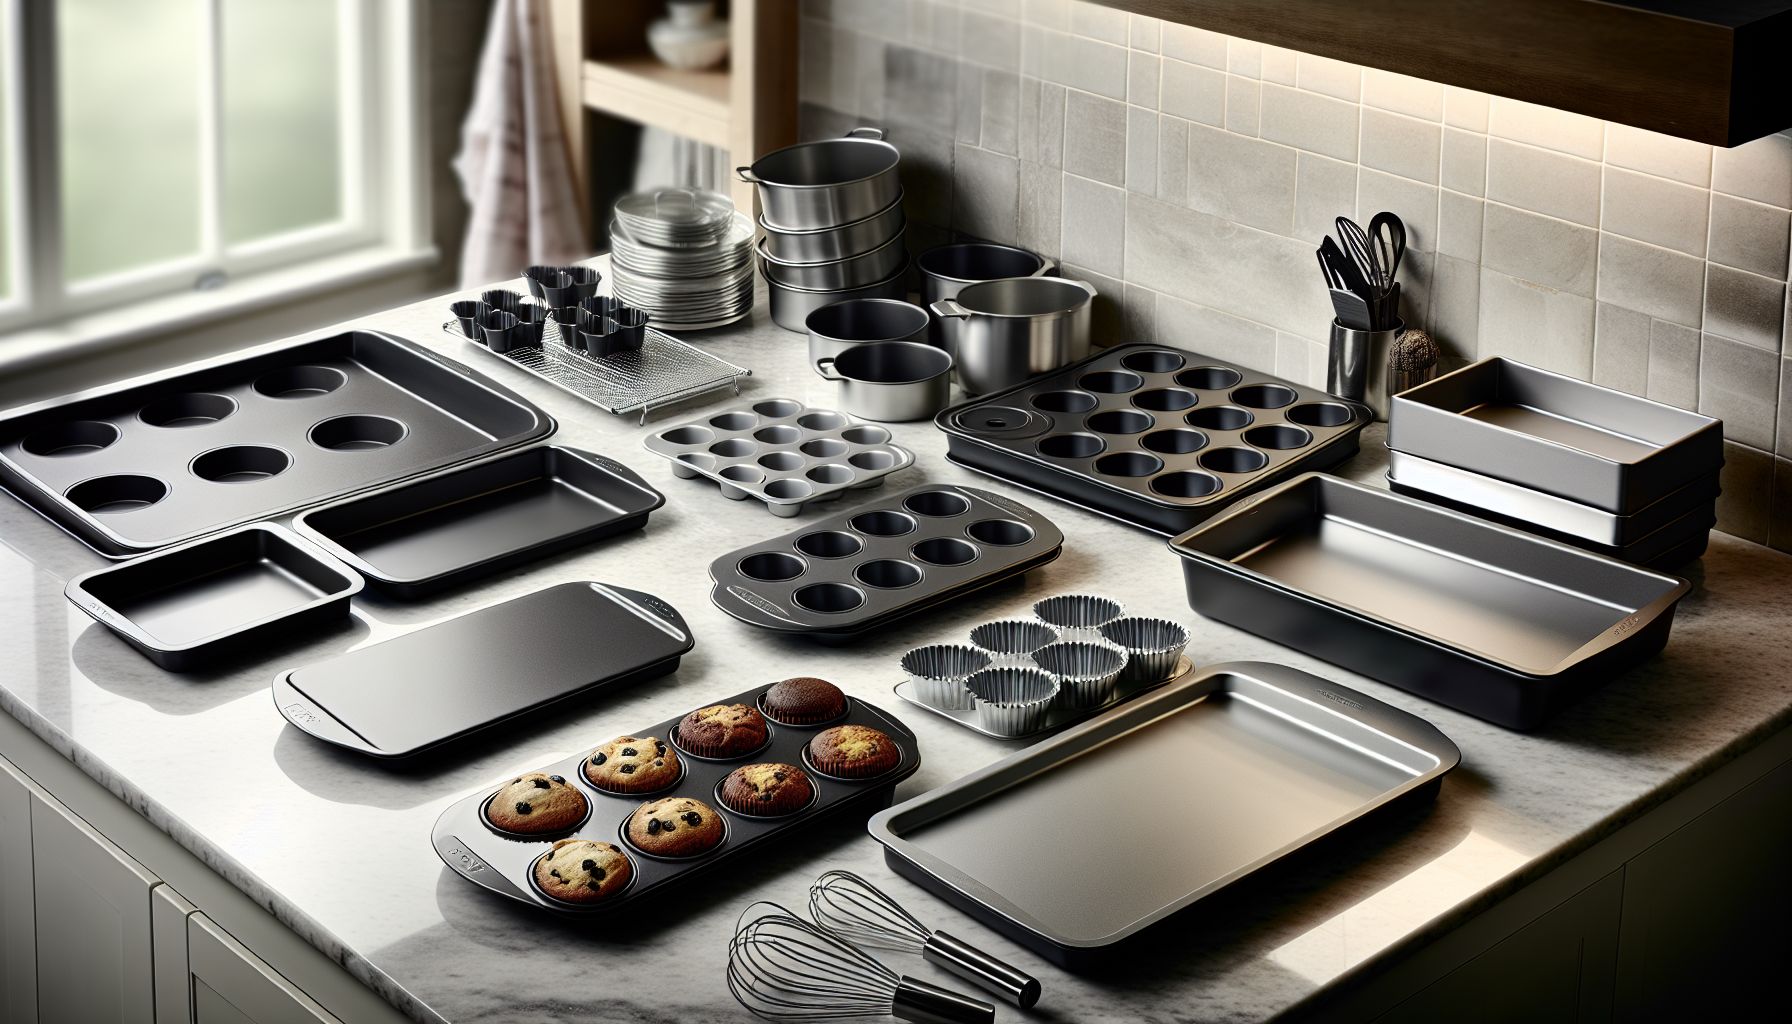 Variety of baking sheets and pans are essential for baking enthusiasts